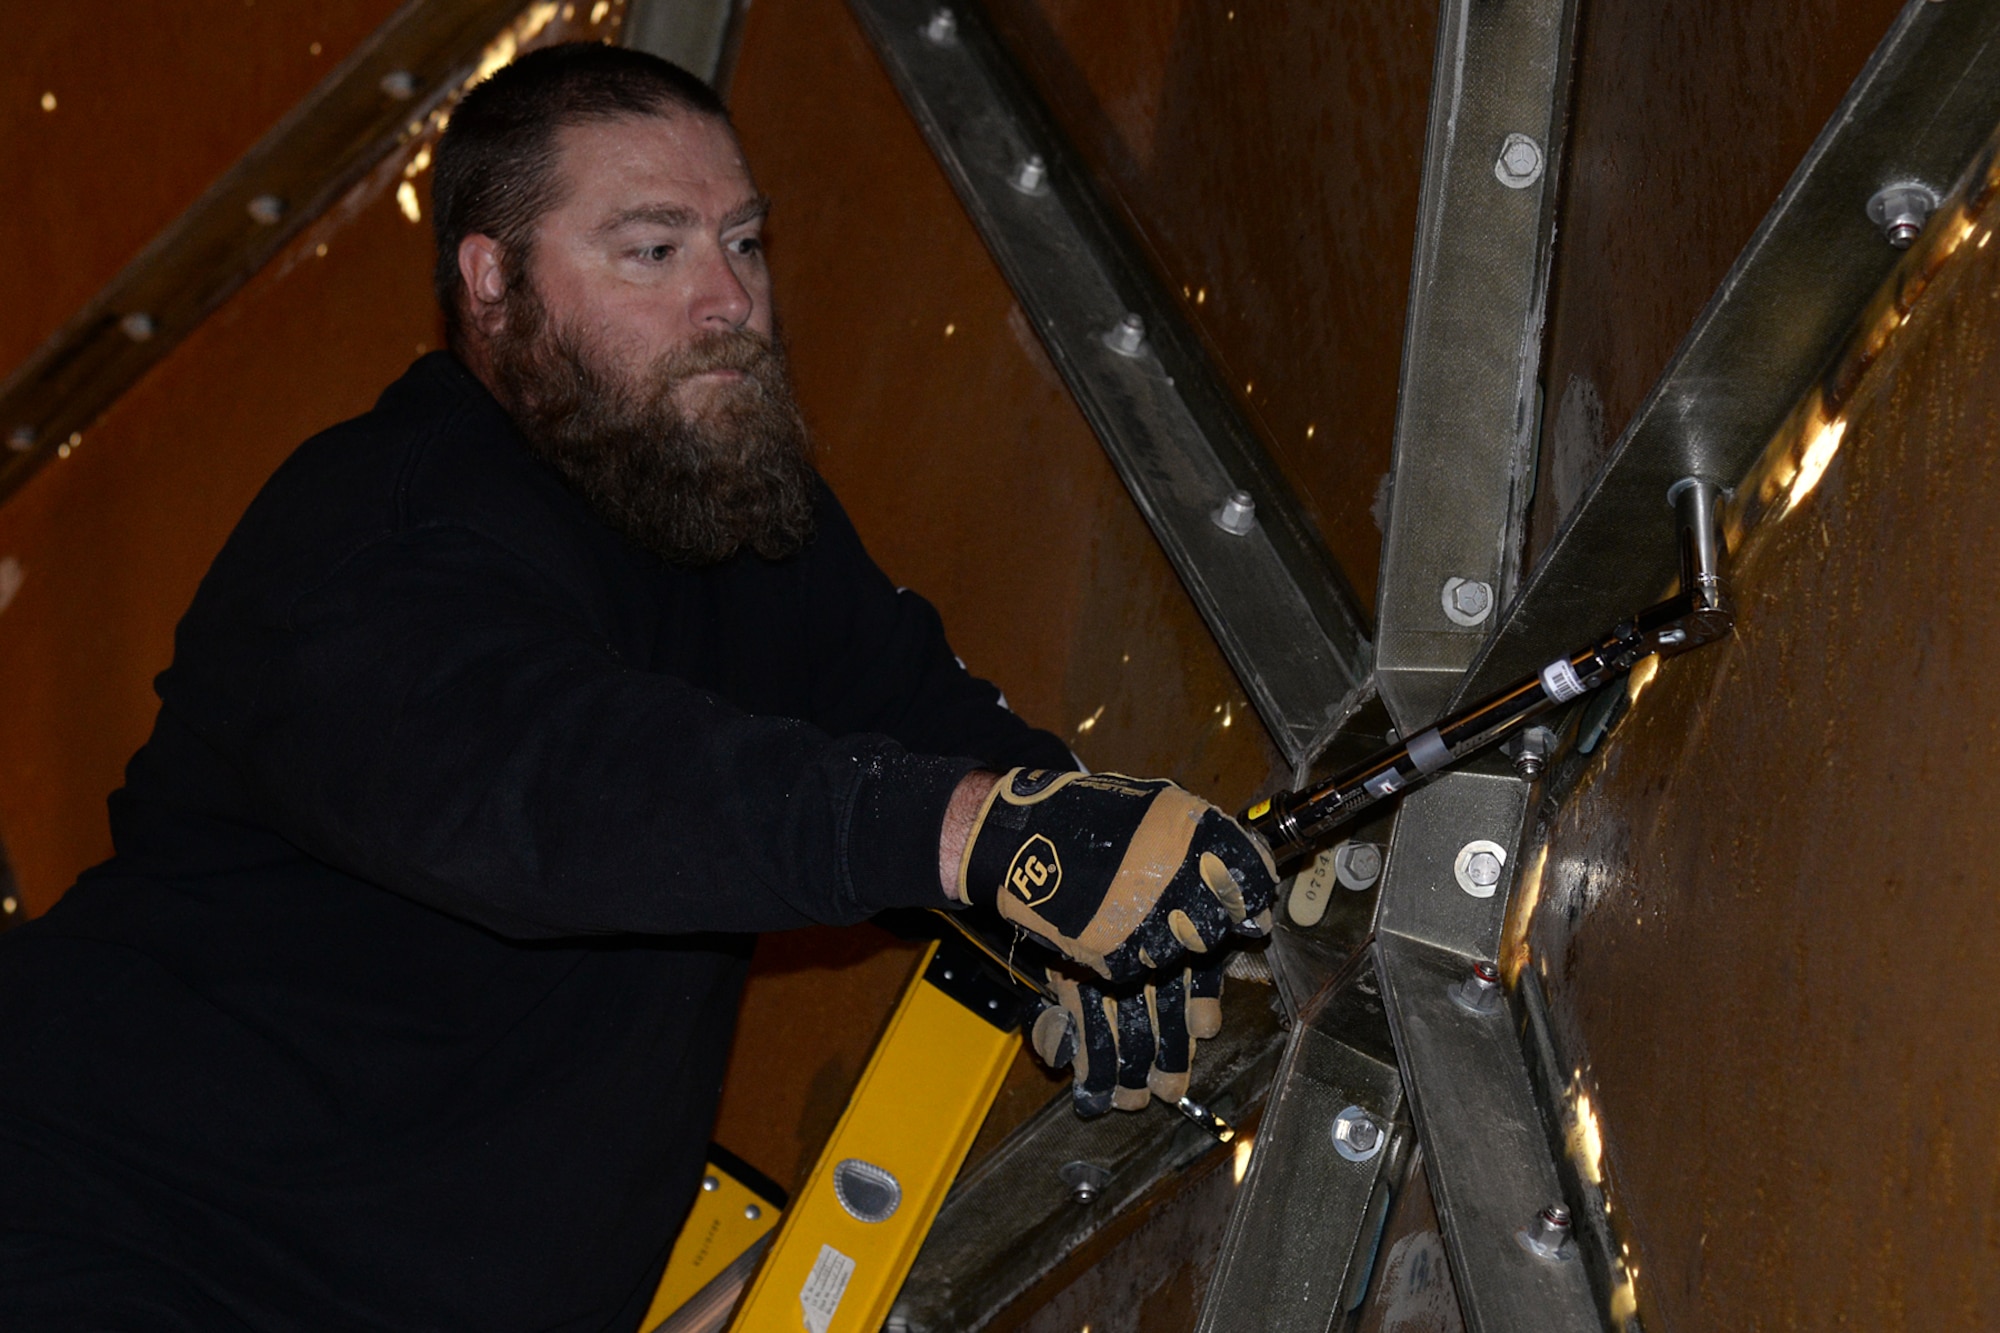 Wayne Howard, 526th Electronics Maintenance Squadron plastic fabricator inspector and team lead, uses a torque wrench to tighten bolts that hold the radomes fiberglass panels together at Cape Romanzof, Alaska on Sep. 26, 2017. (U.S. Air Force photo by Alex R. Lloyd)